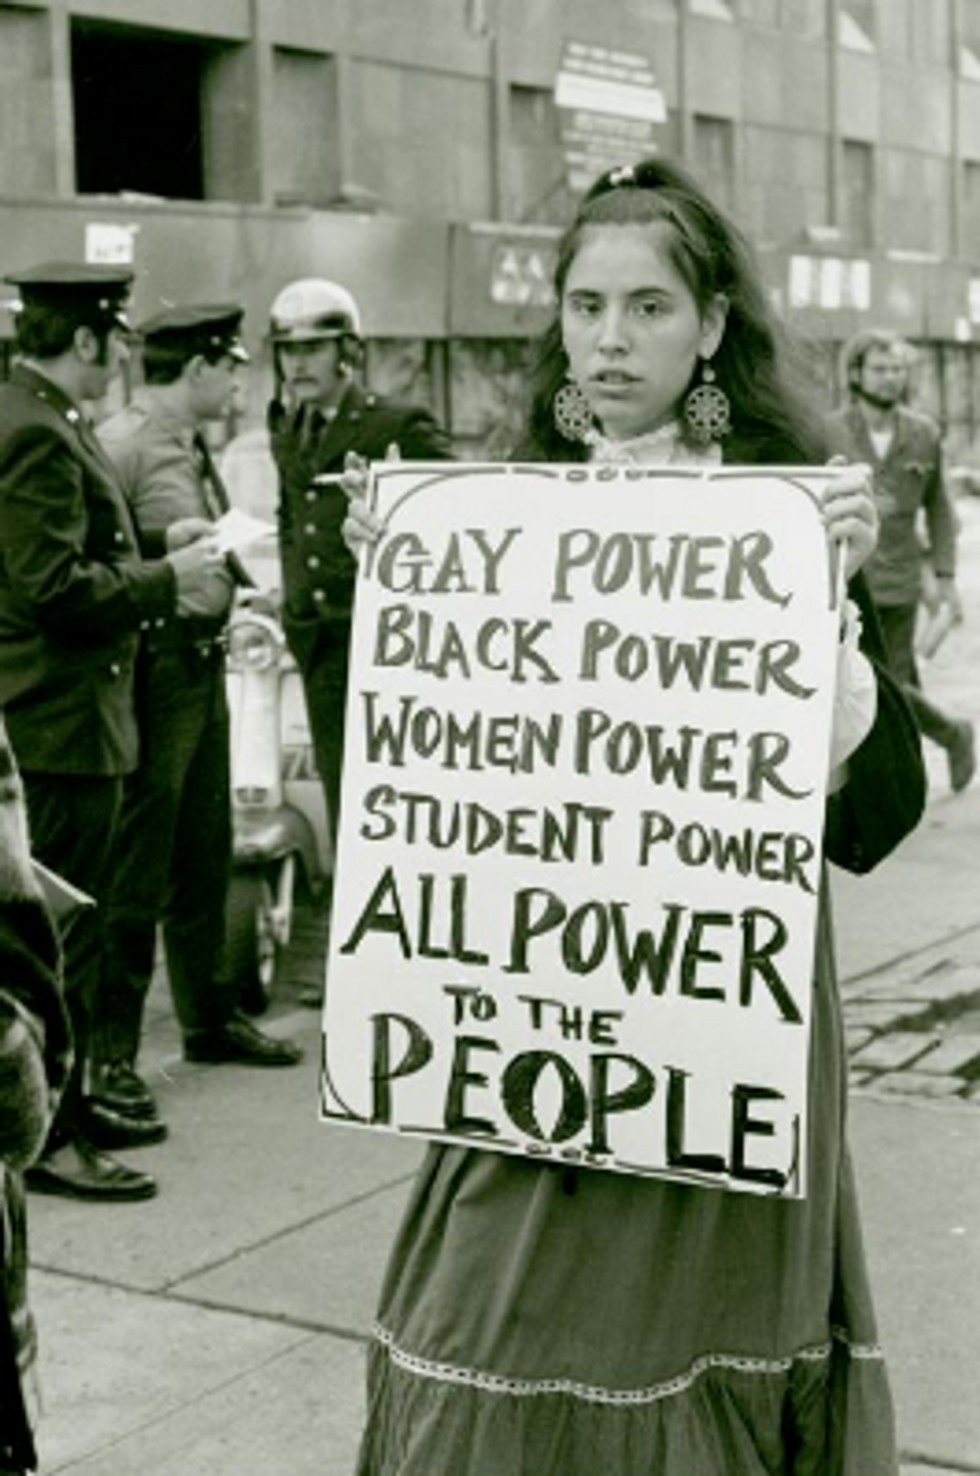 Protestor at NYU's Weinstein Hall, Kay Tobin, Diana Davies, 1970. Courtesy of New York Public Library Archives.